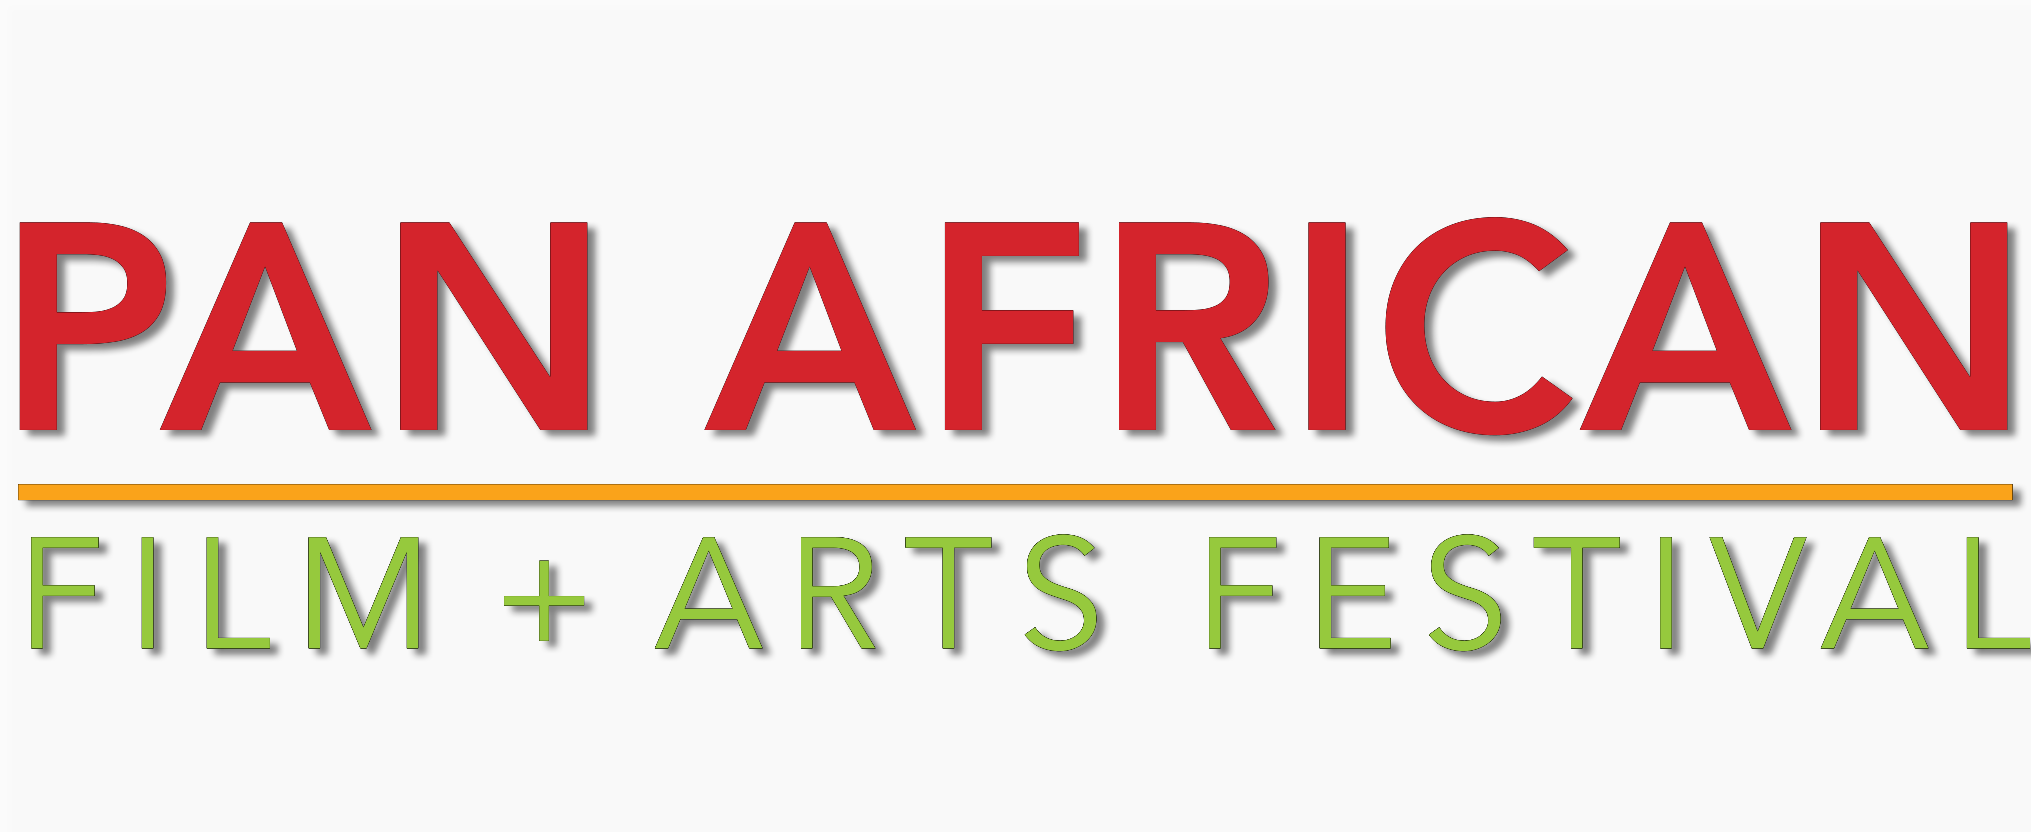 Pan African Film Festival Announces Virtual Lineup for 2021 MyLO